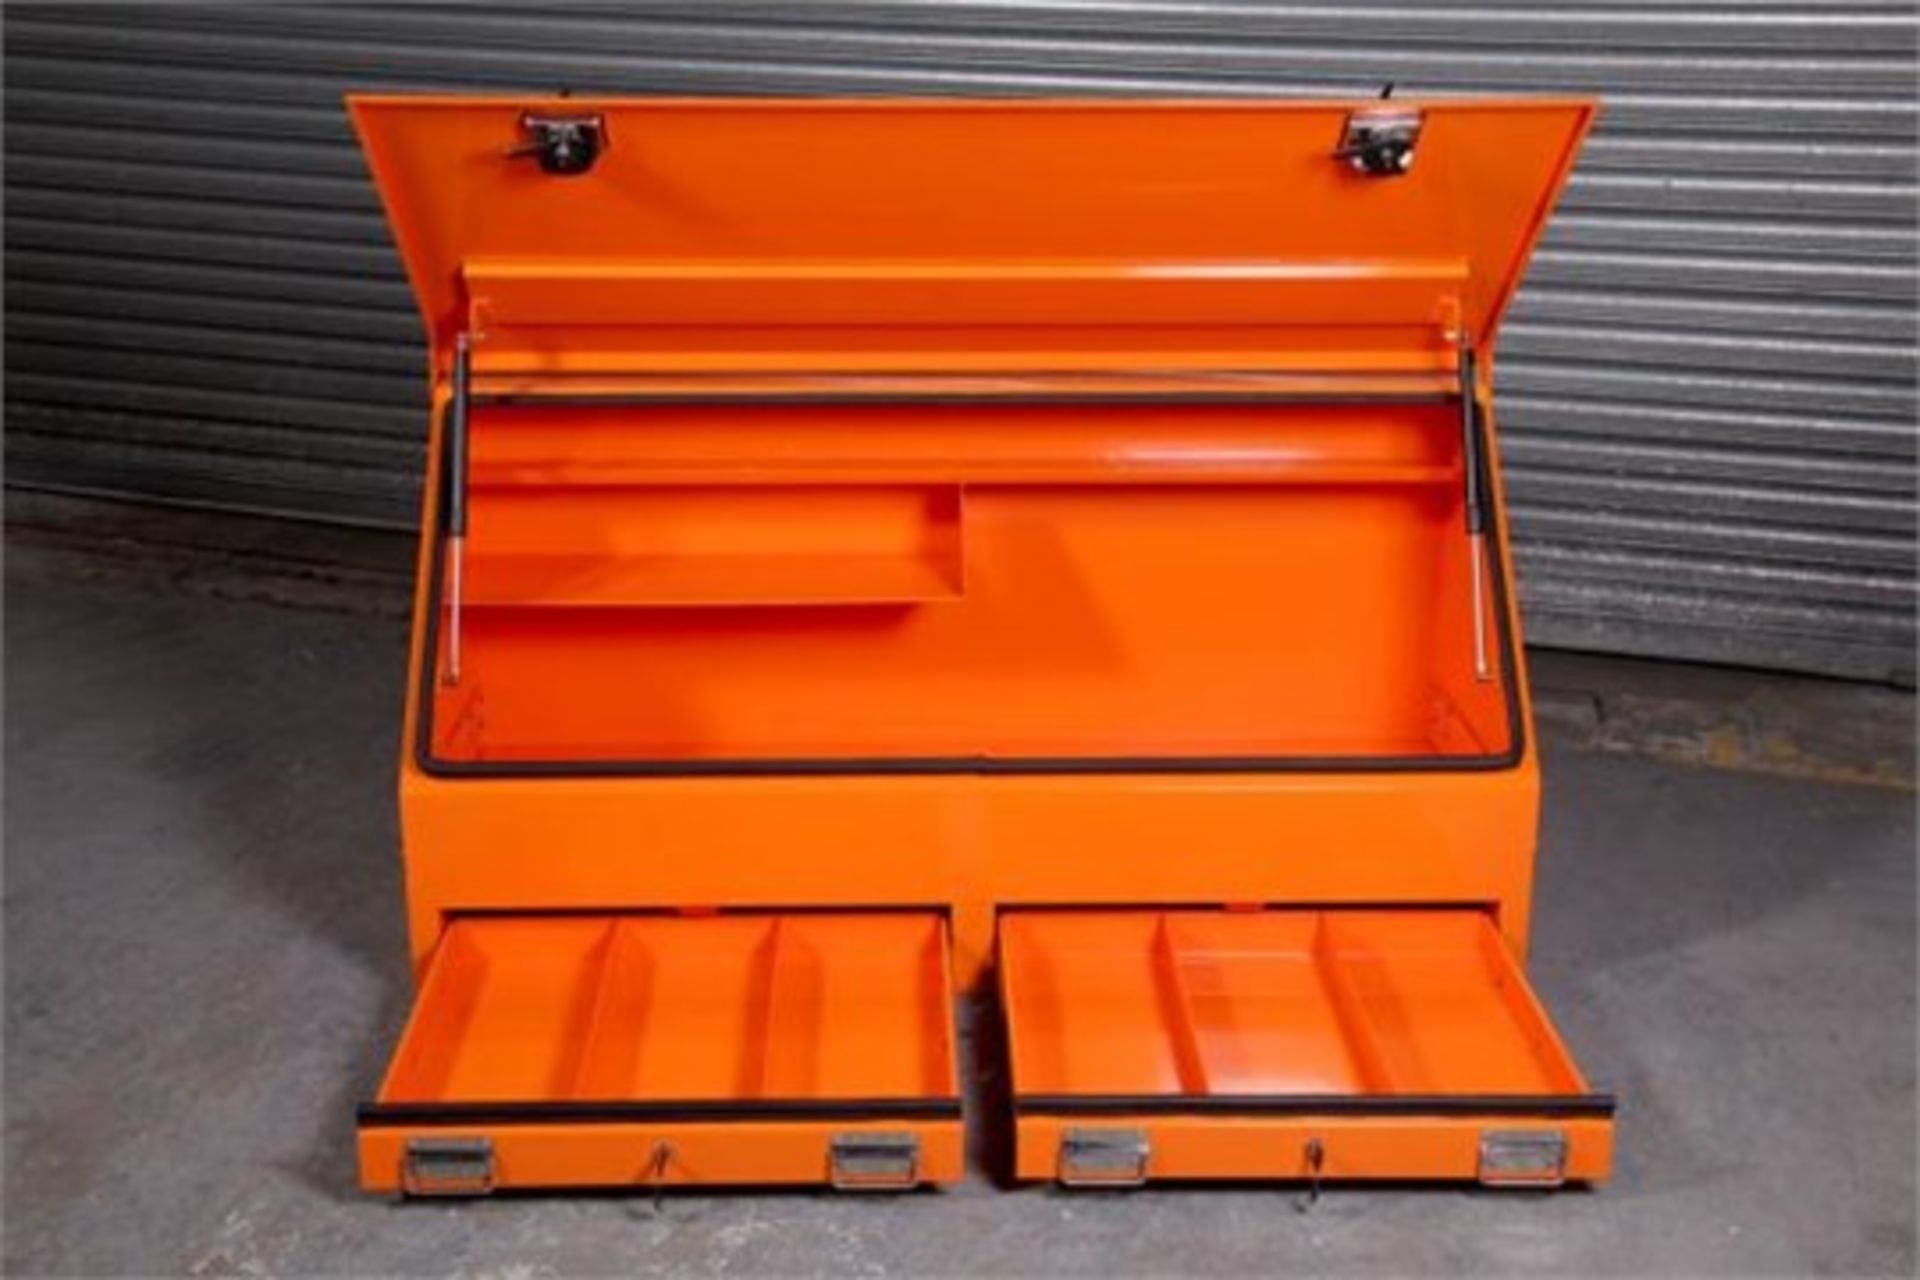 Mild steel vehicle toolbox powder coated orange the unit is fitted with twin gas struts on the lid